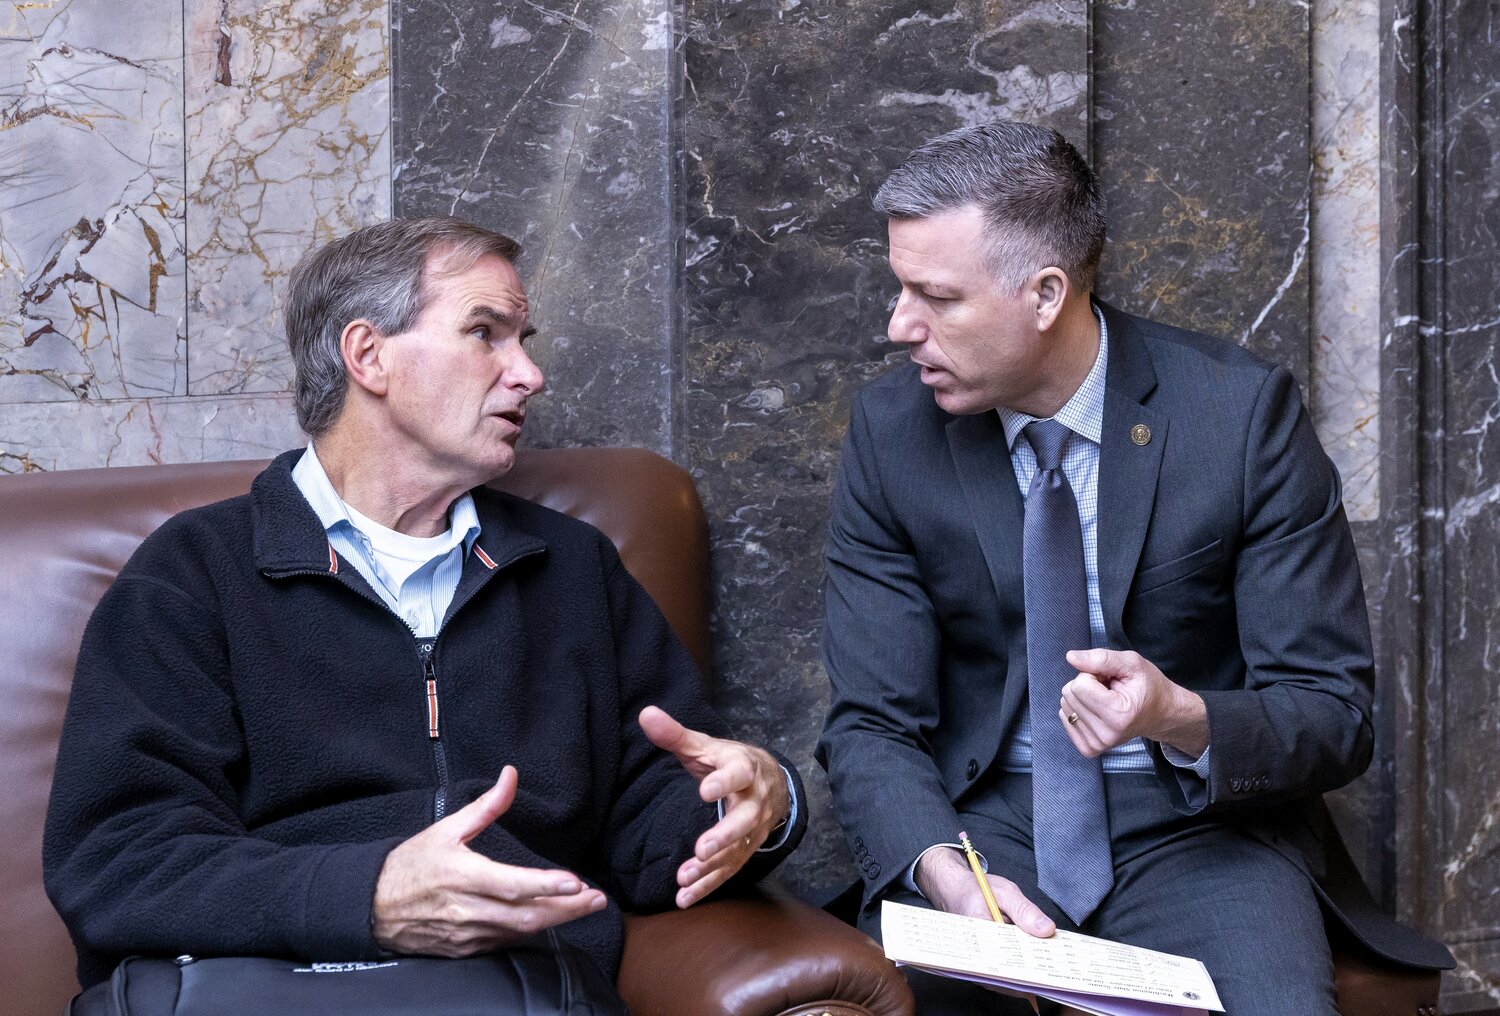 Leavenworth Mayor Carl Florea (left) visits with Sen. Brad Hawkins in Olympia to discuss affordable housing, tourism issues, and capital budget requests.